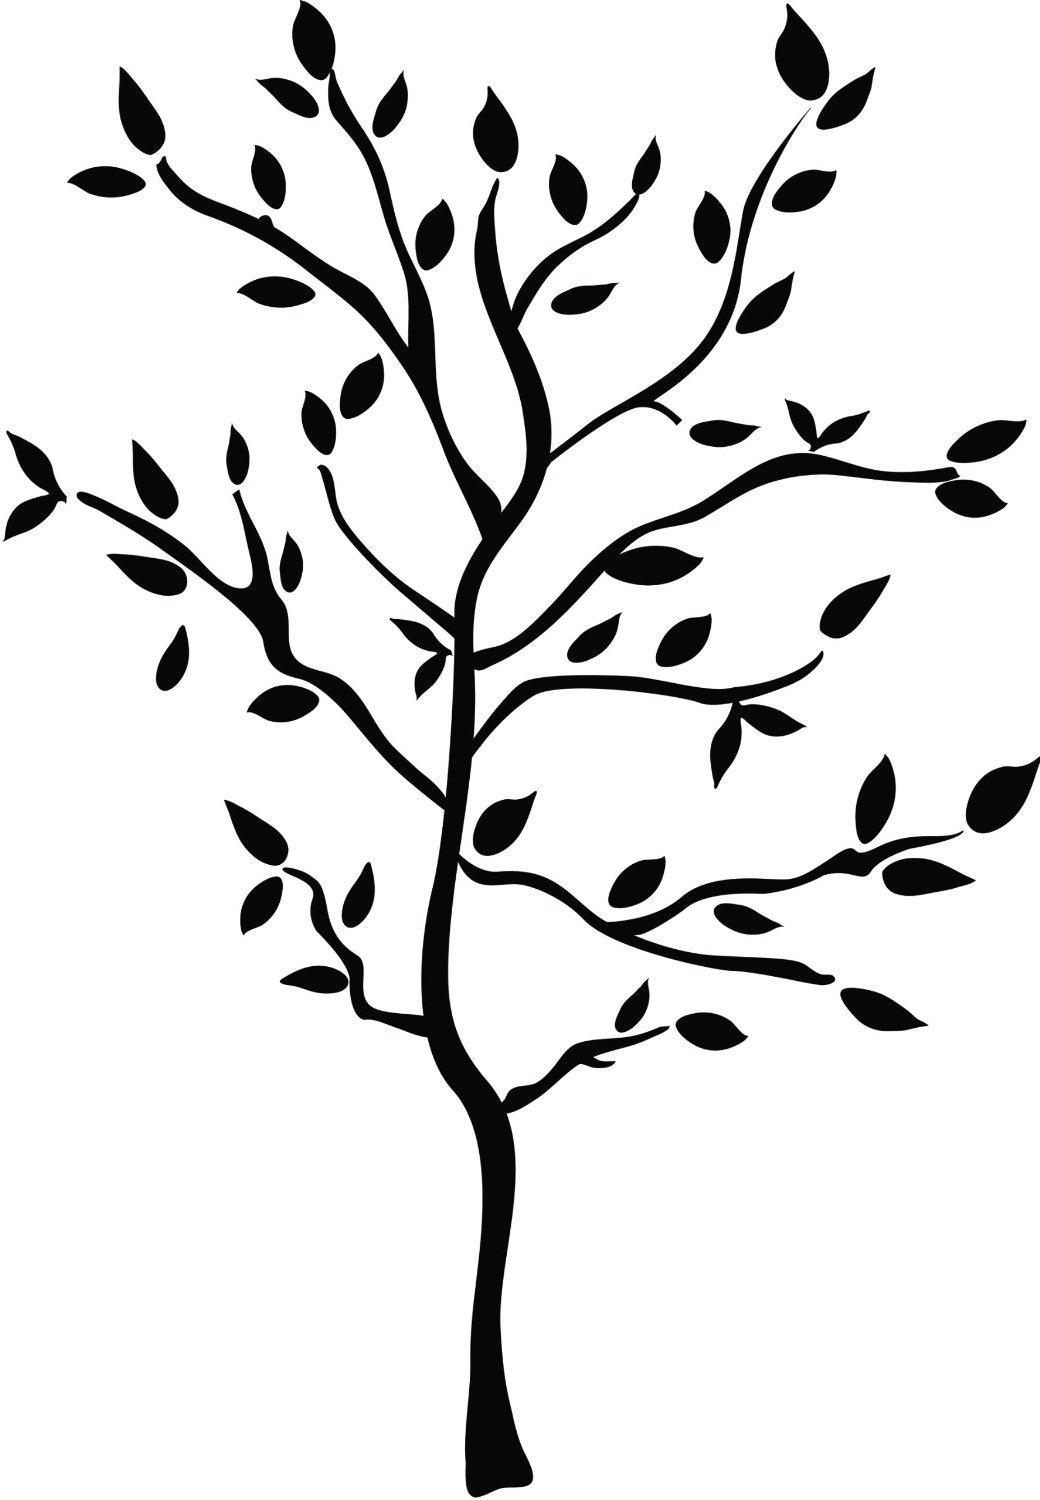 Cartoon Trees With Branches